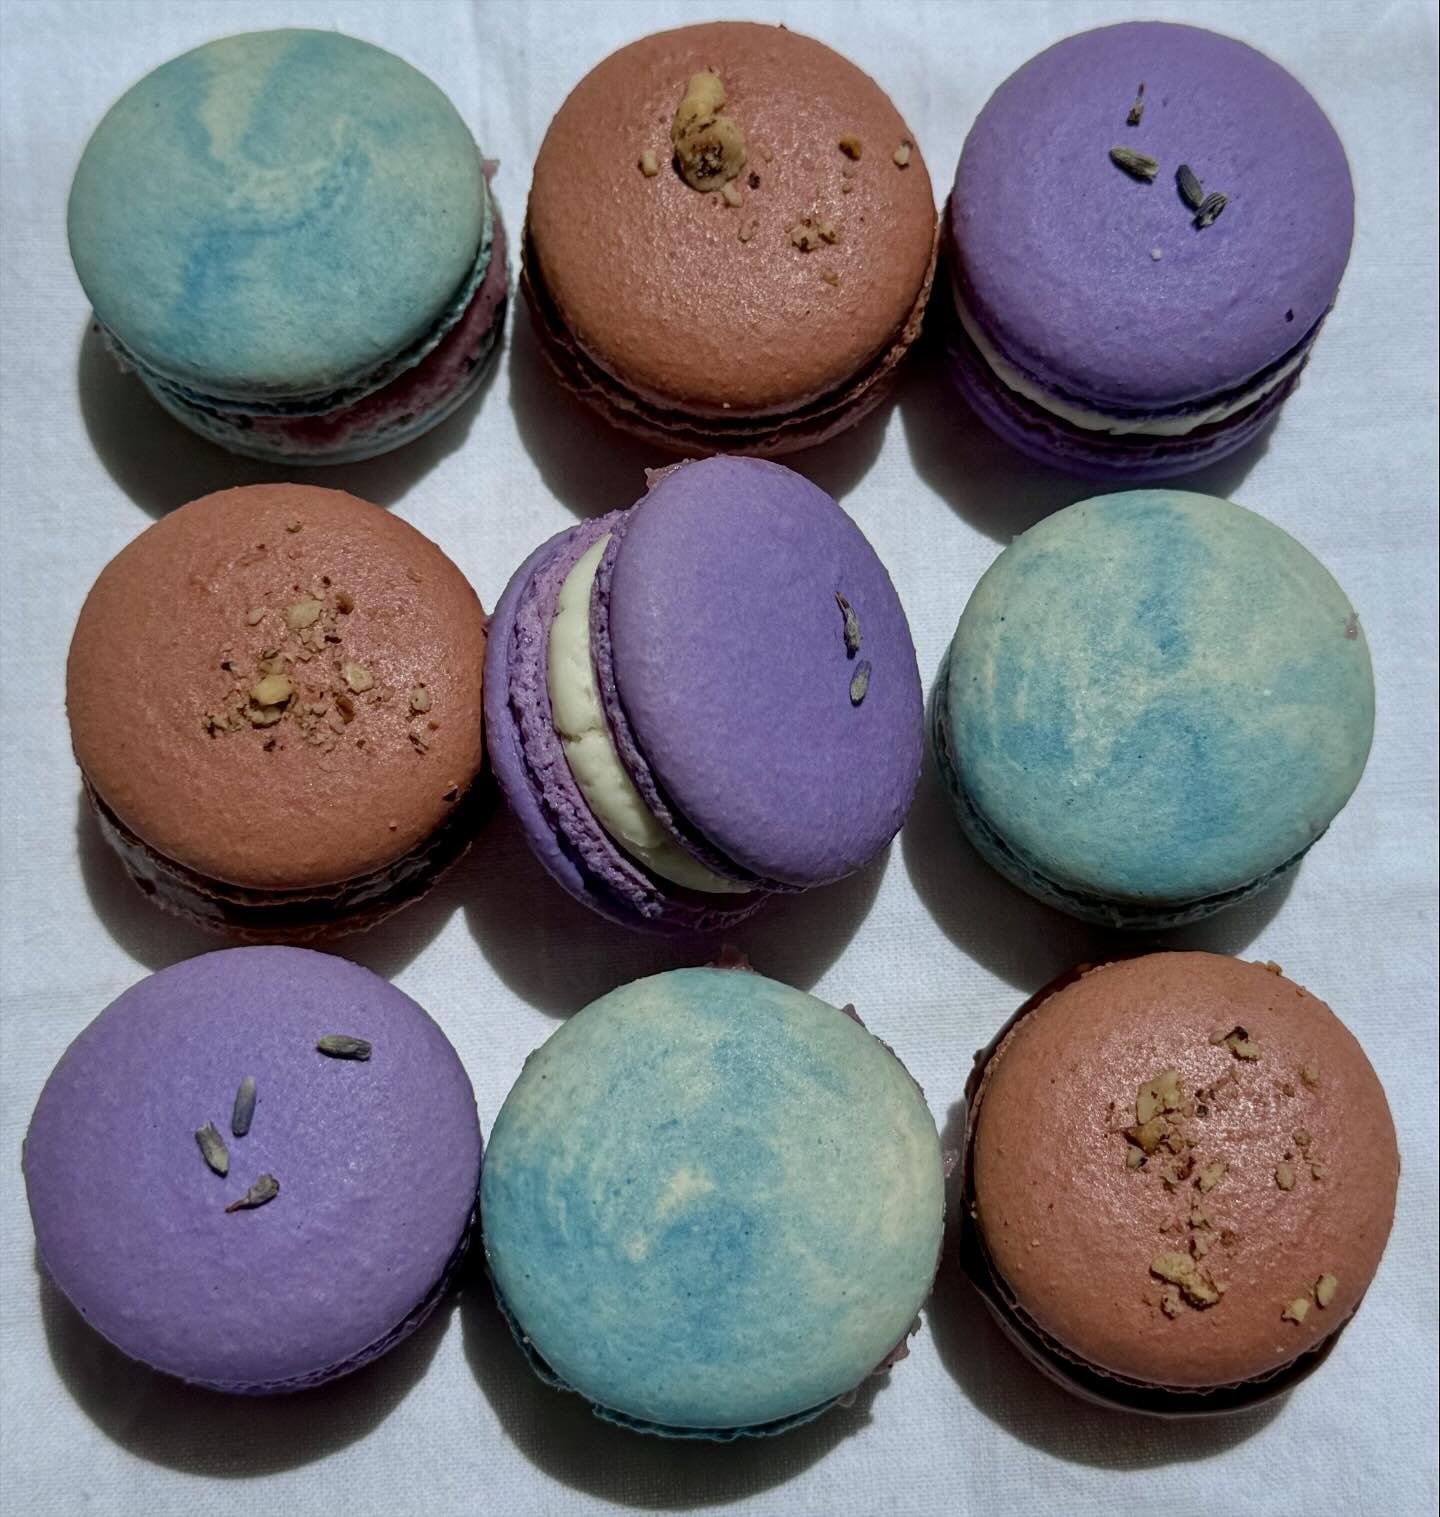 We have new macaron flavors! Come into Fairmount to try our Chocolate Hazelnut, Lavender, and Blueberry Cheesecake macarons.

#ontherise #artisan #bread #artisanbread #cleveland #bakery #clevelandbakery #pastries #bbga #eatlocalohio #clefood #eatloca